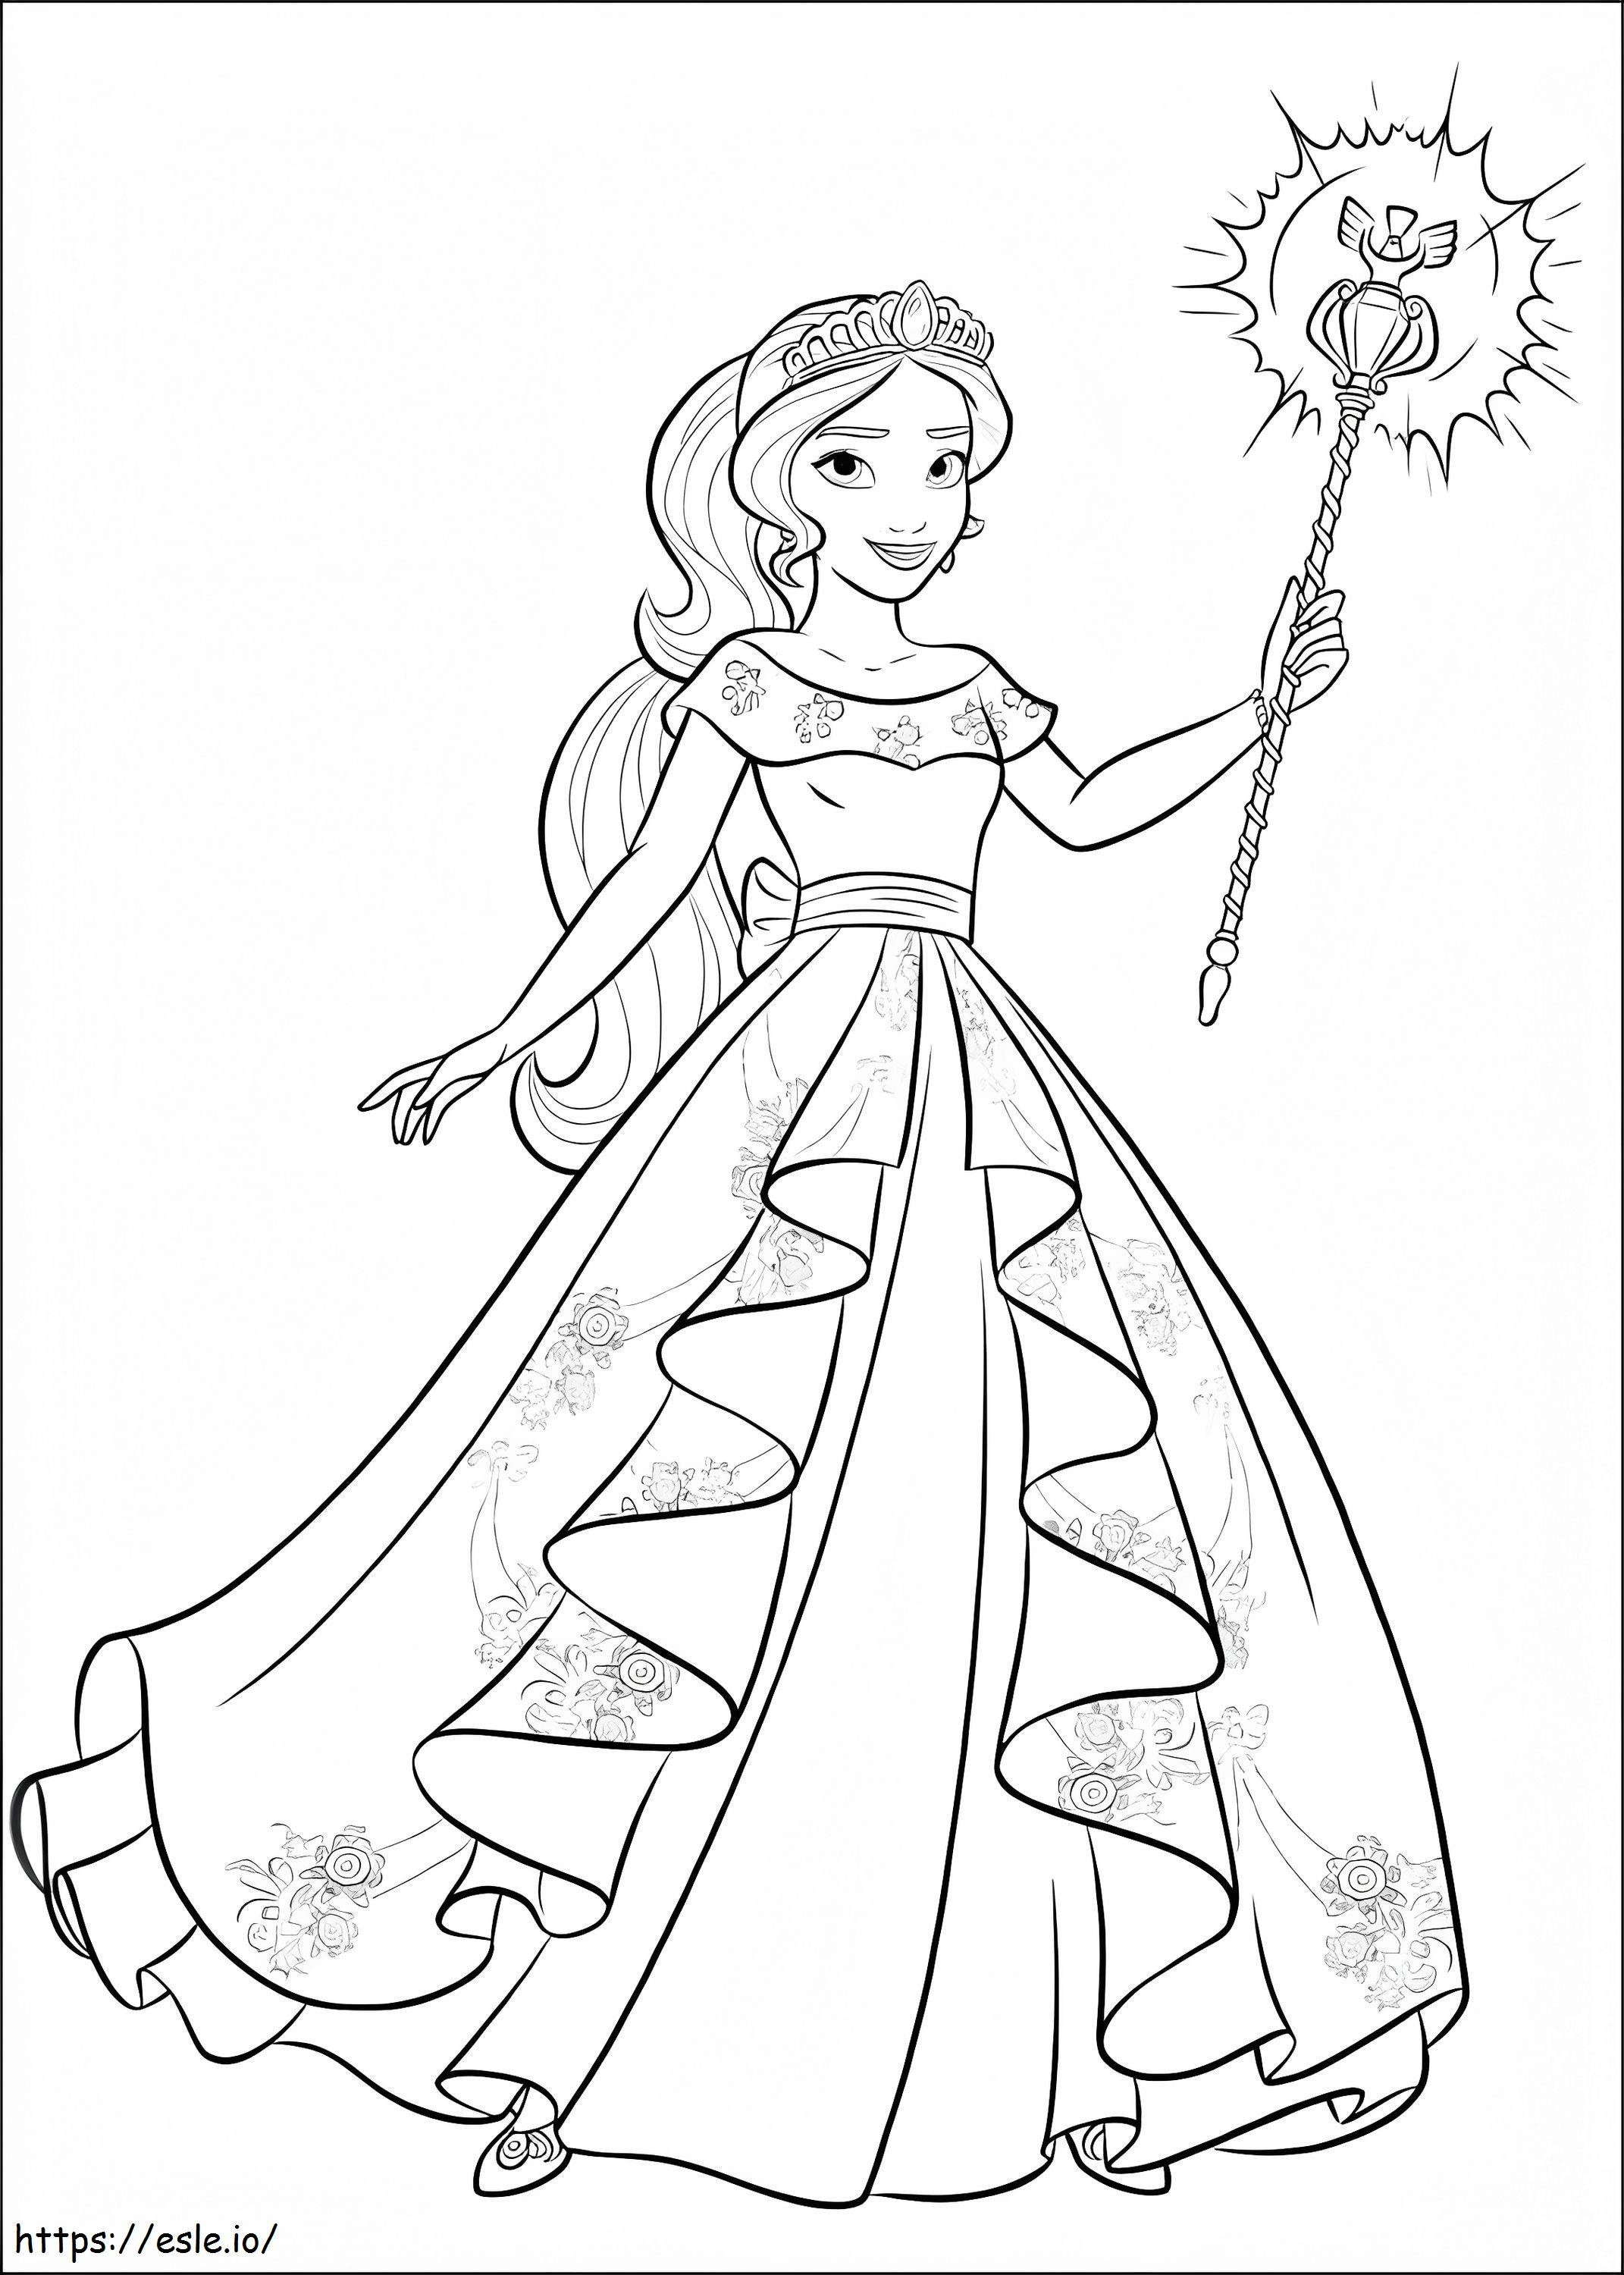 Elena Smiling coloring page